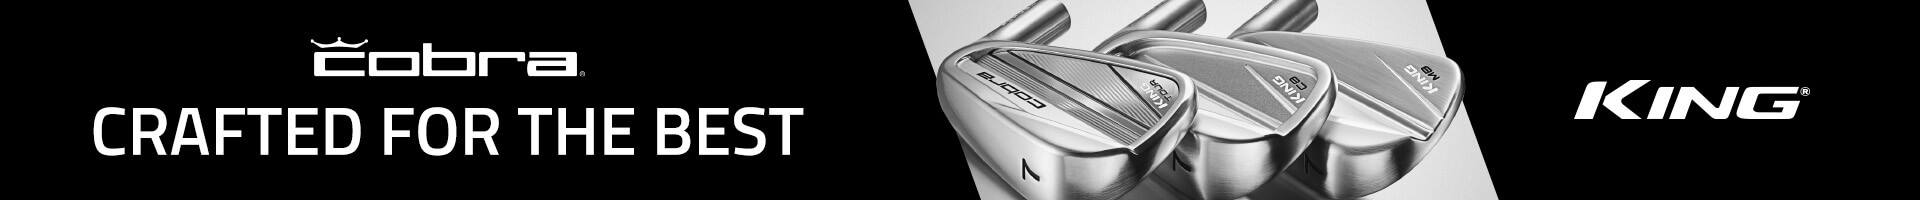 Cobra King Irons Now Available